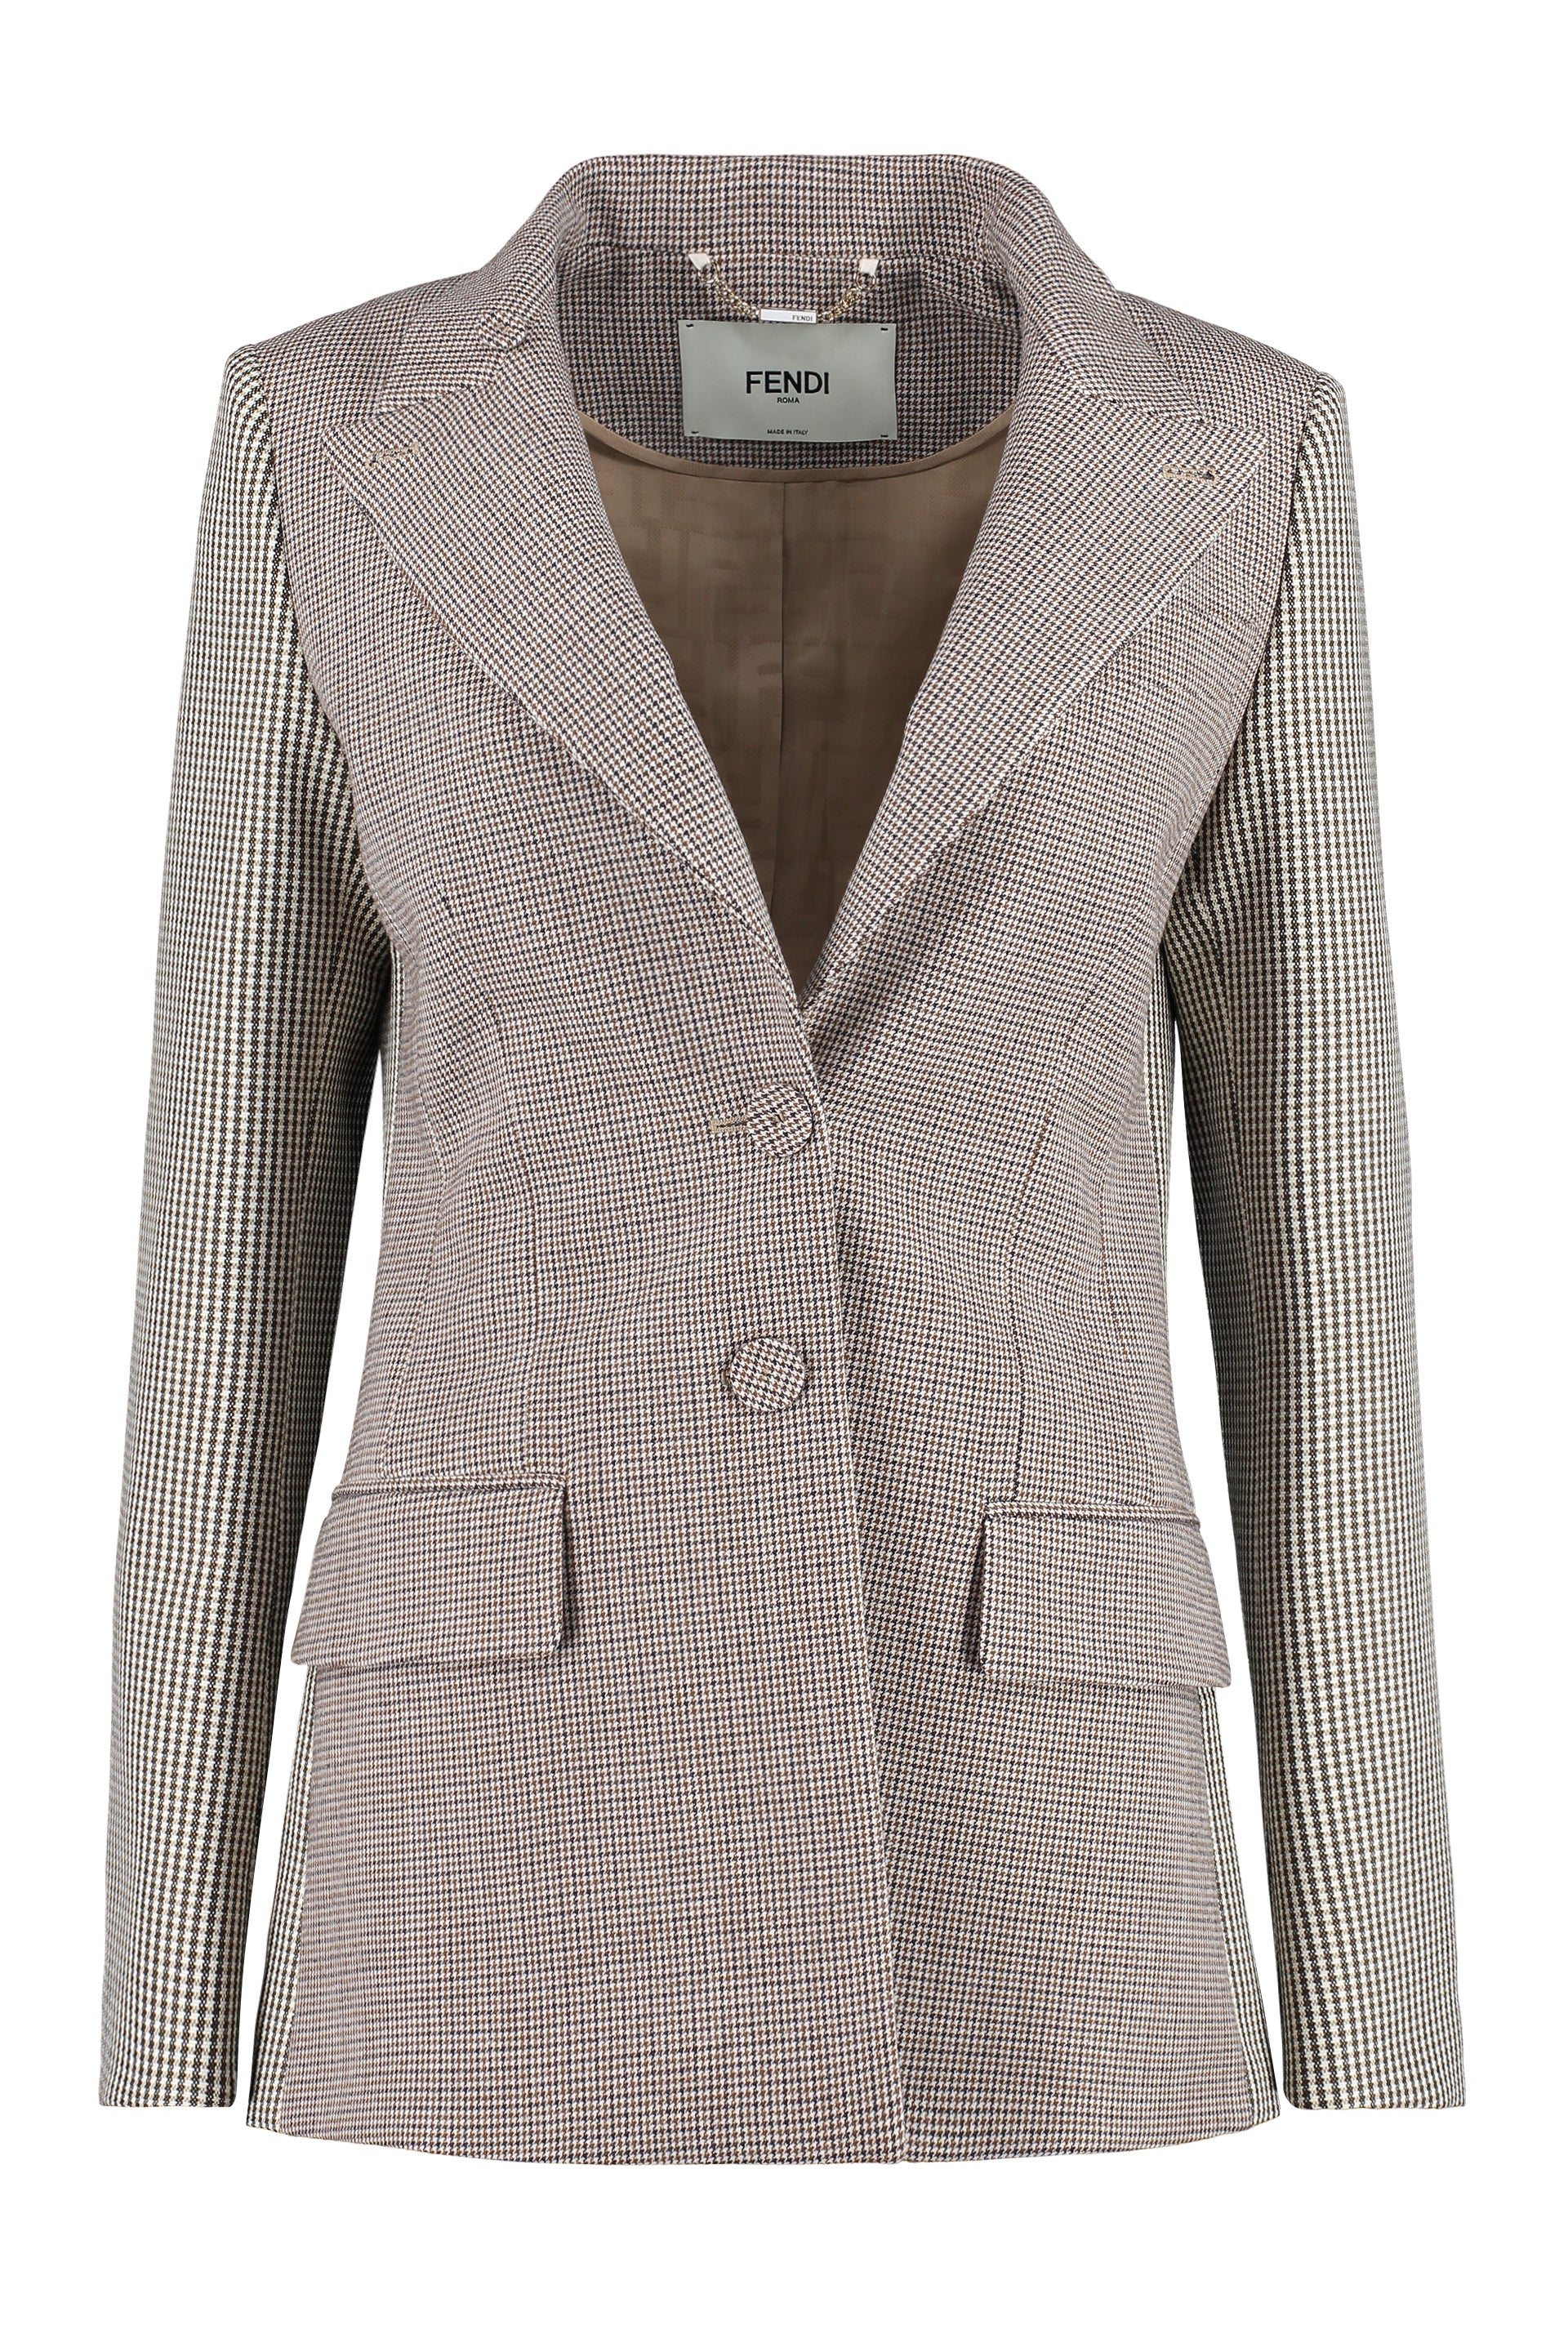 Shop Fendi Feminine Houndstooth Blazer With Structured Shoulders And Double Back Slit In Brown